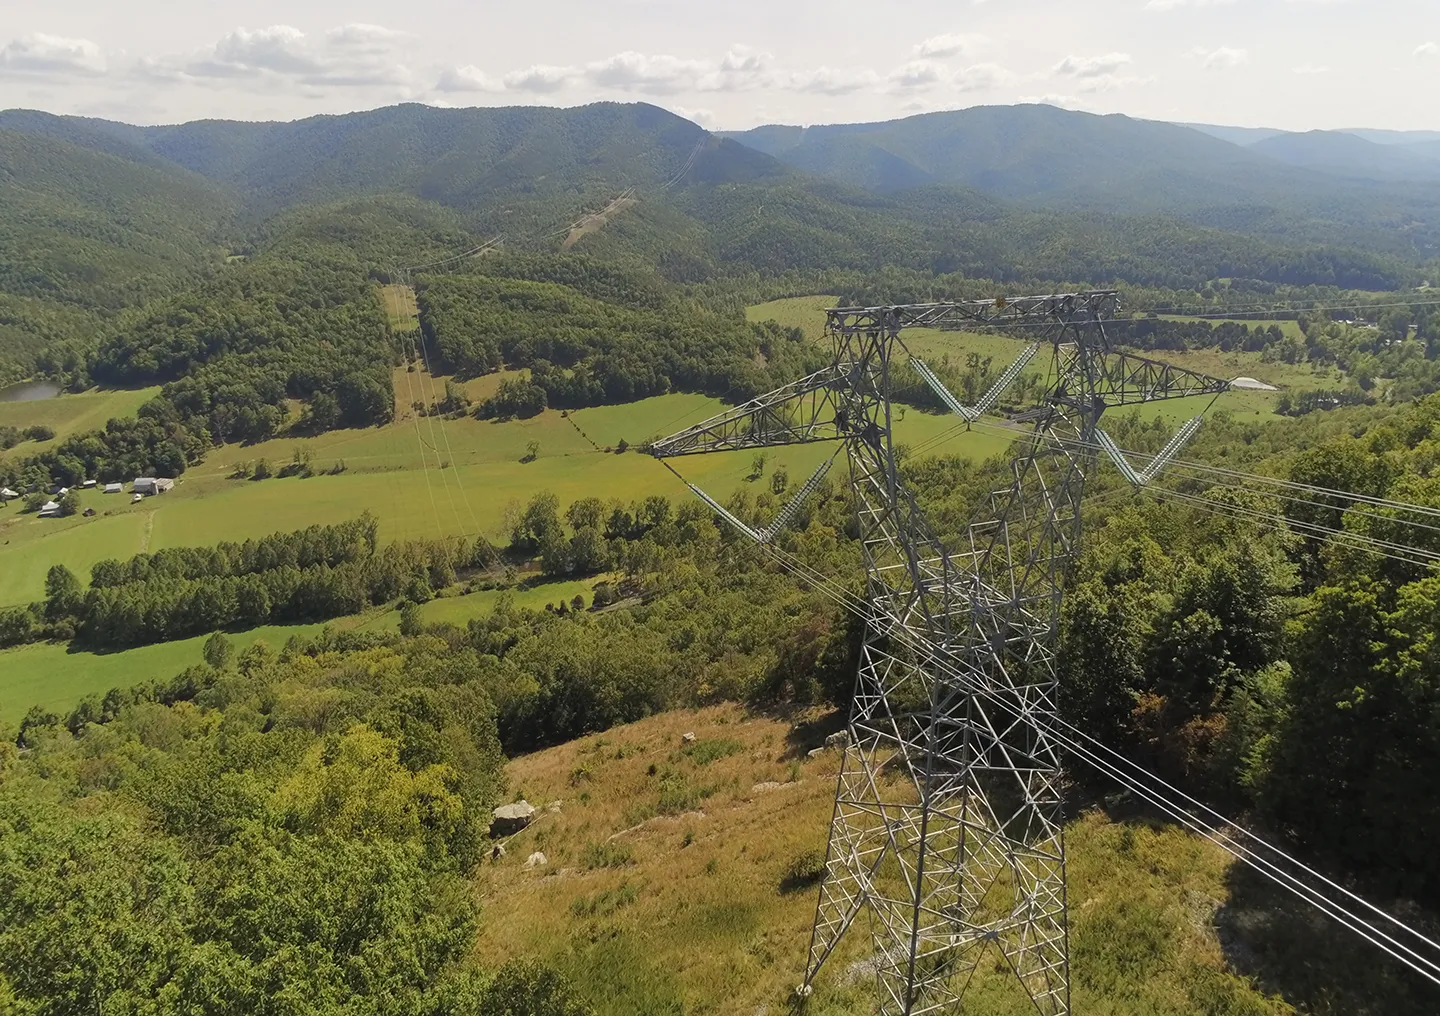 Our team helped to rebuild a 500 kilovolt (kV) electric transmission line that was originally constructed and energized in the 1960s.